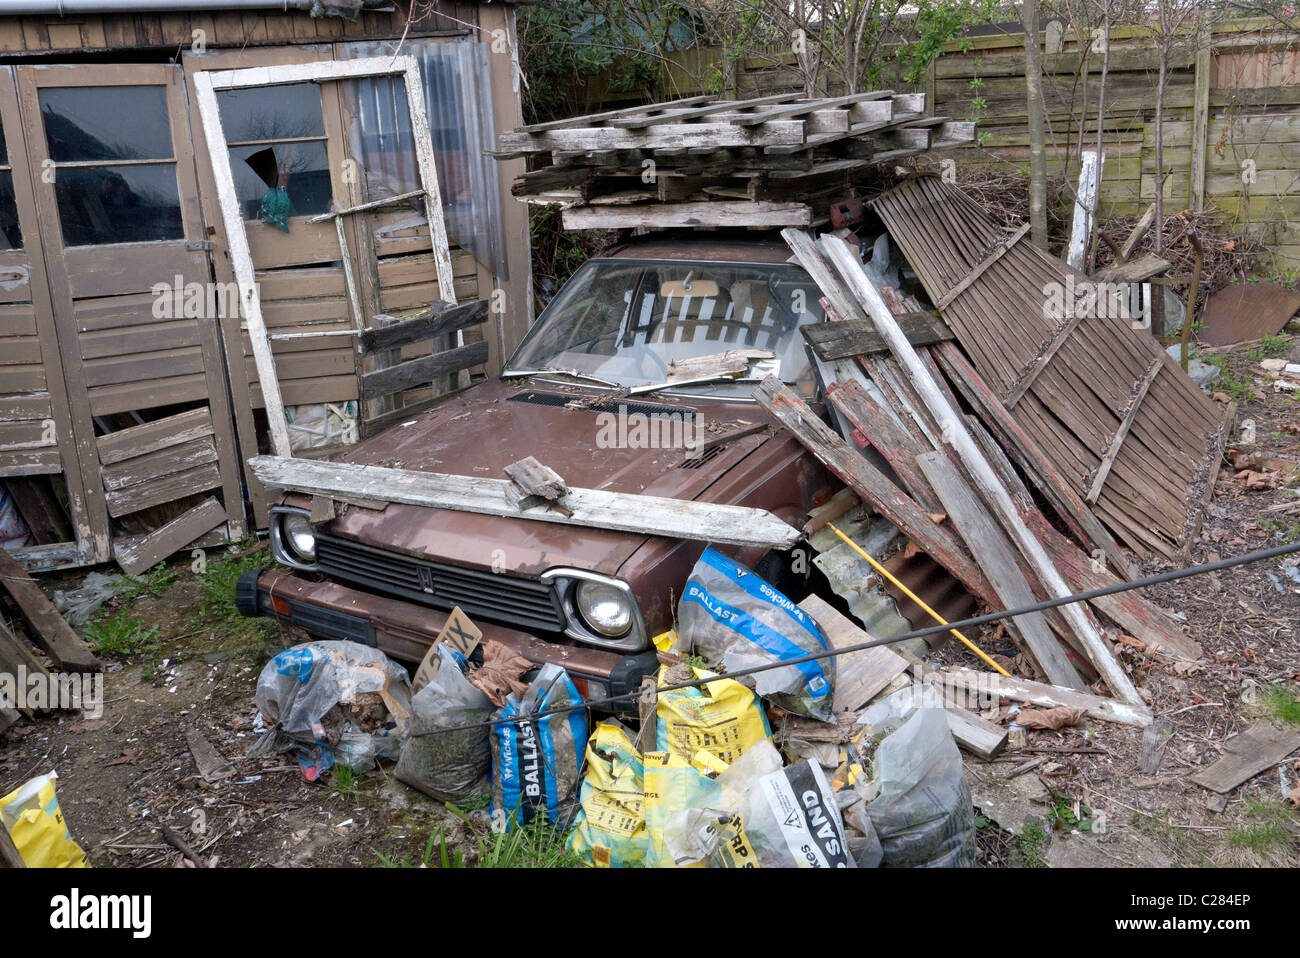 A disused car covered with rubbish abandoned outside a residentual garage. Stock Photo